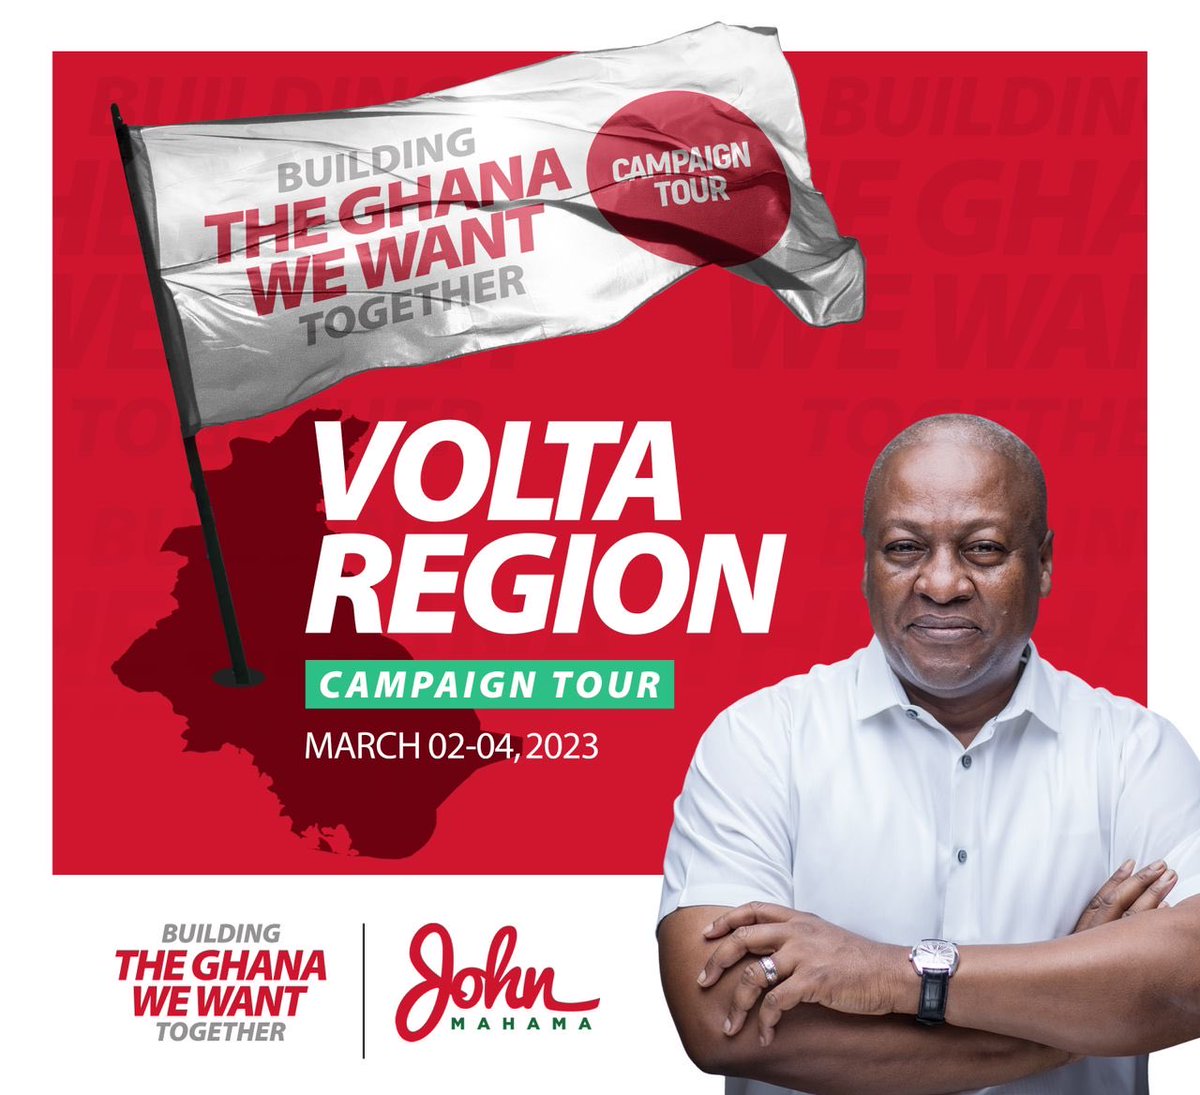 The only man who can build #TheGhanaWeWant now! 

#JohnMahama 
#VoltaRegion